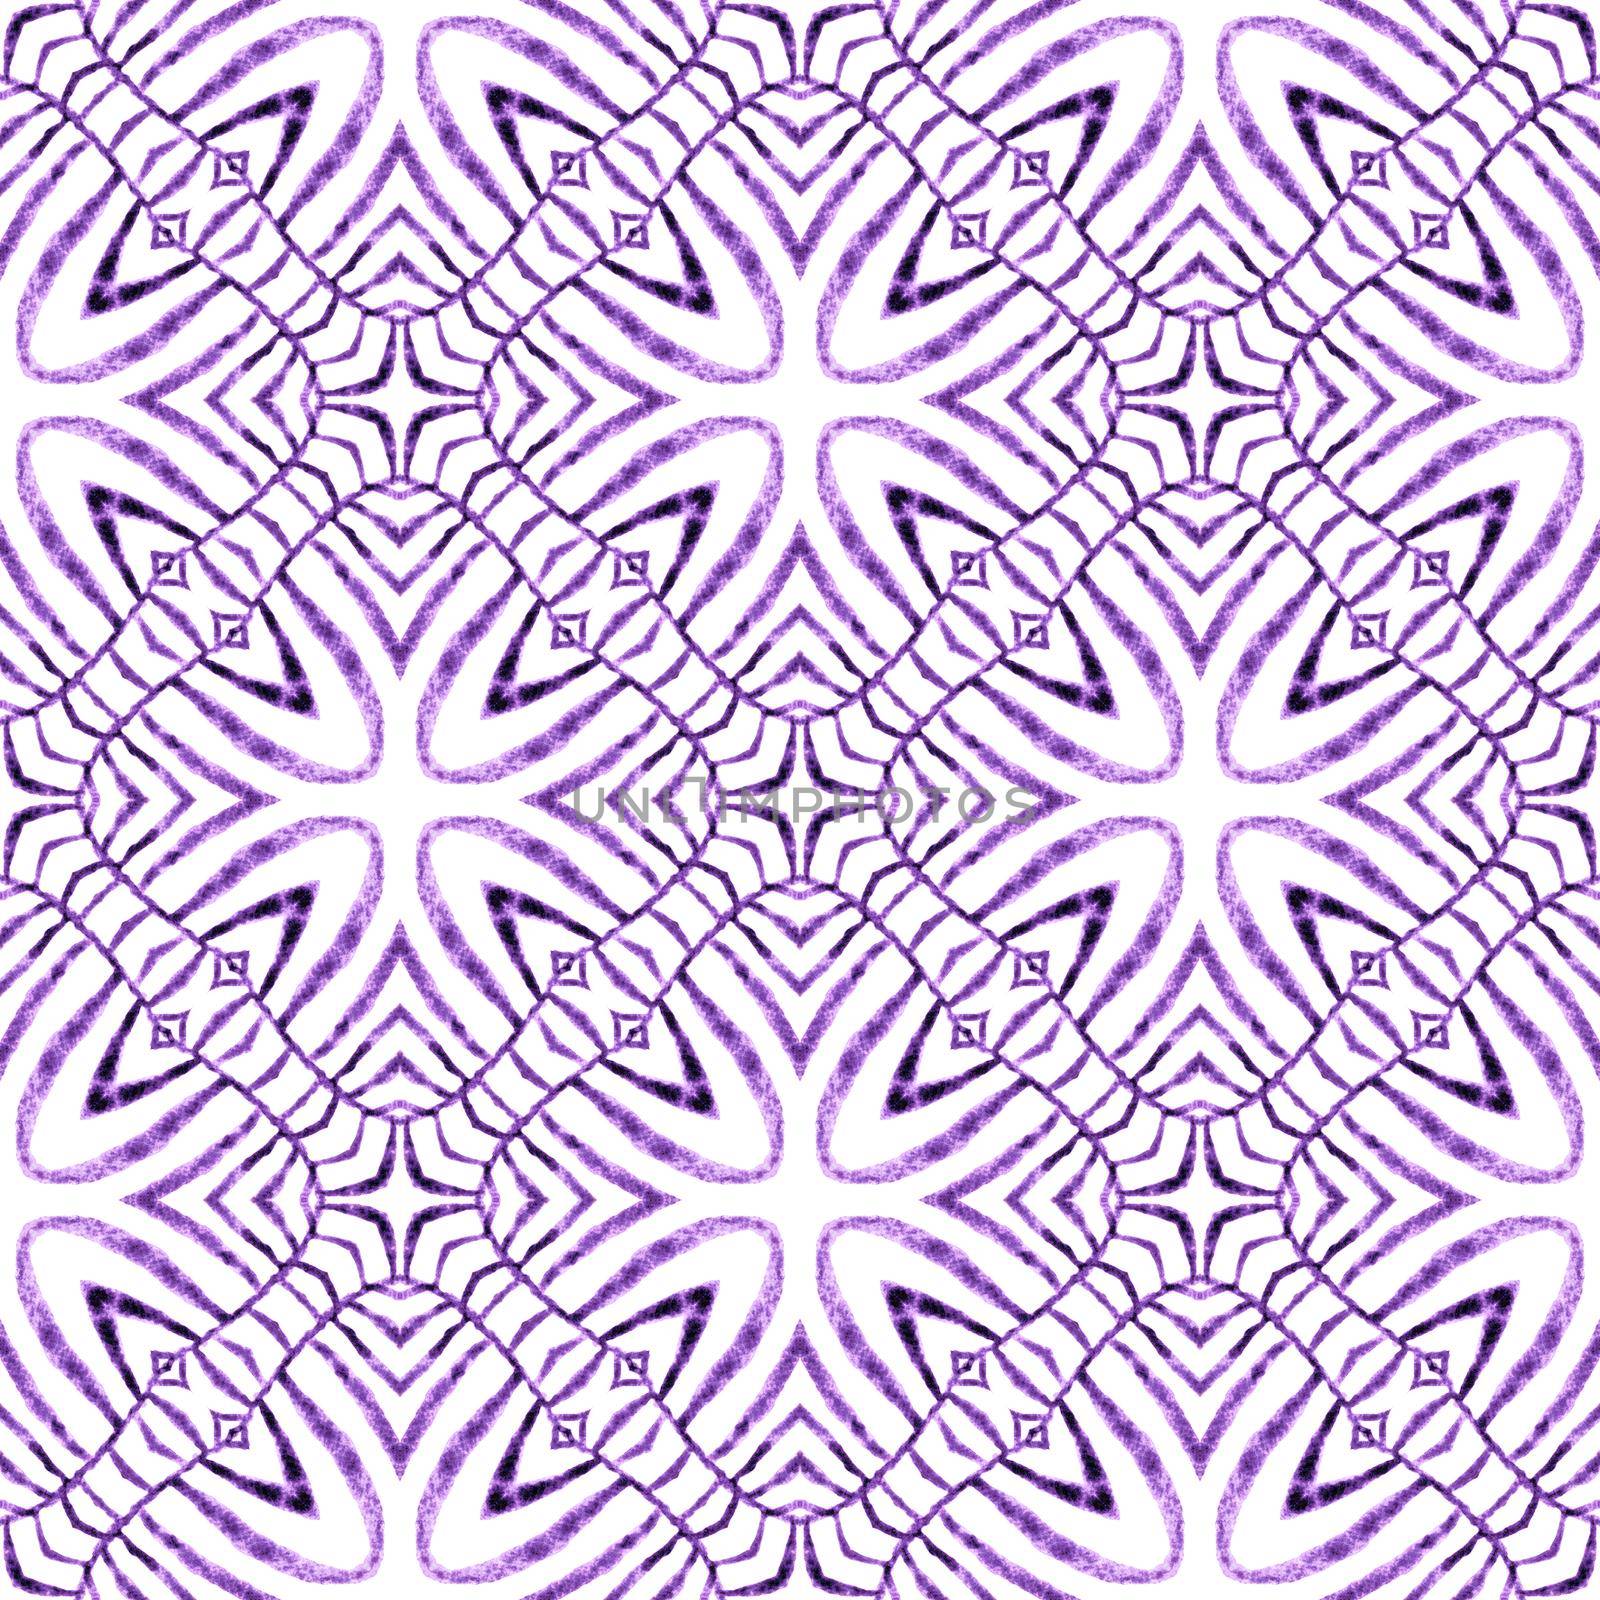 Ethnic hand painted pattern. Purple positive by beginagain